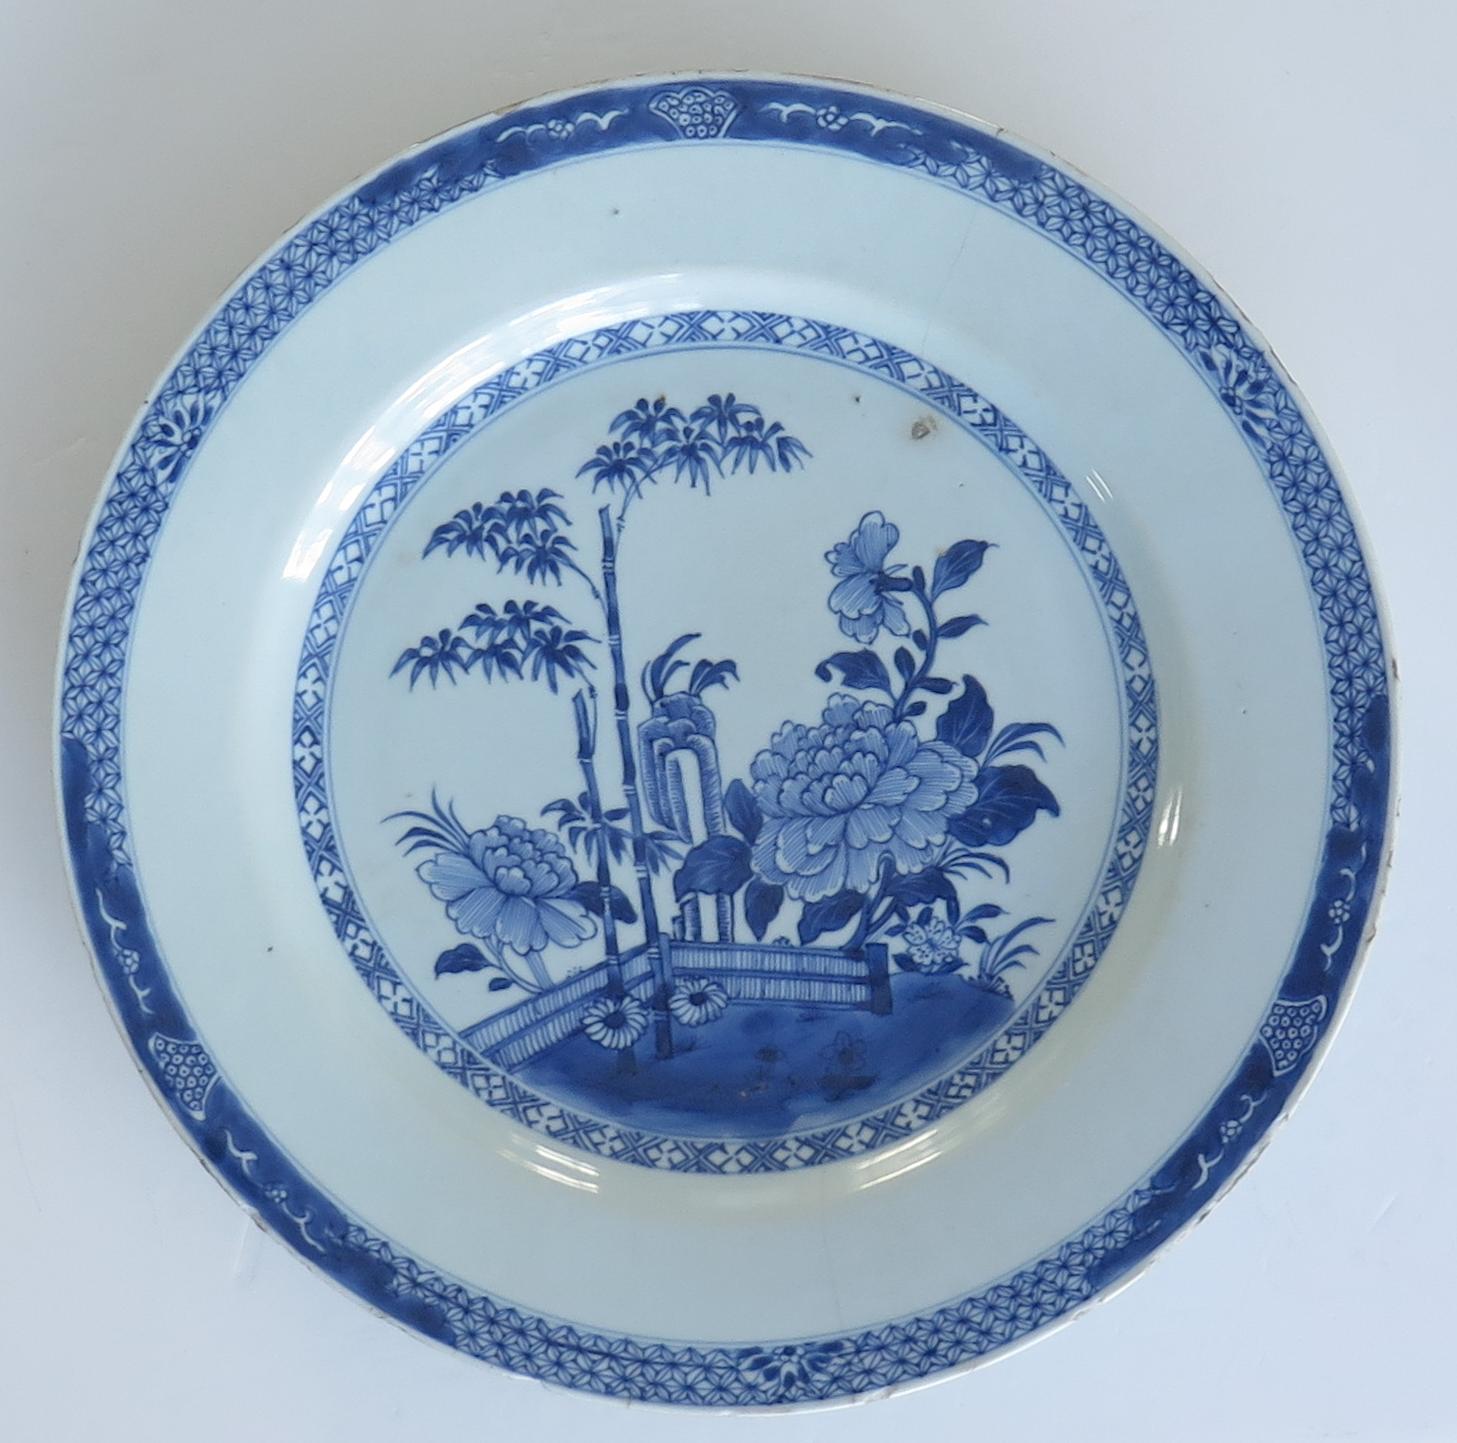 This is a good Chinese porcelain circular Platter or large plate, made for the export (Canton) market, during the middle of the 18th century, Qing-Qianlong period.

The plate is well hand decorated with much detail in varying shades of cobalt